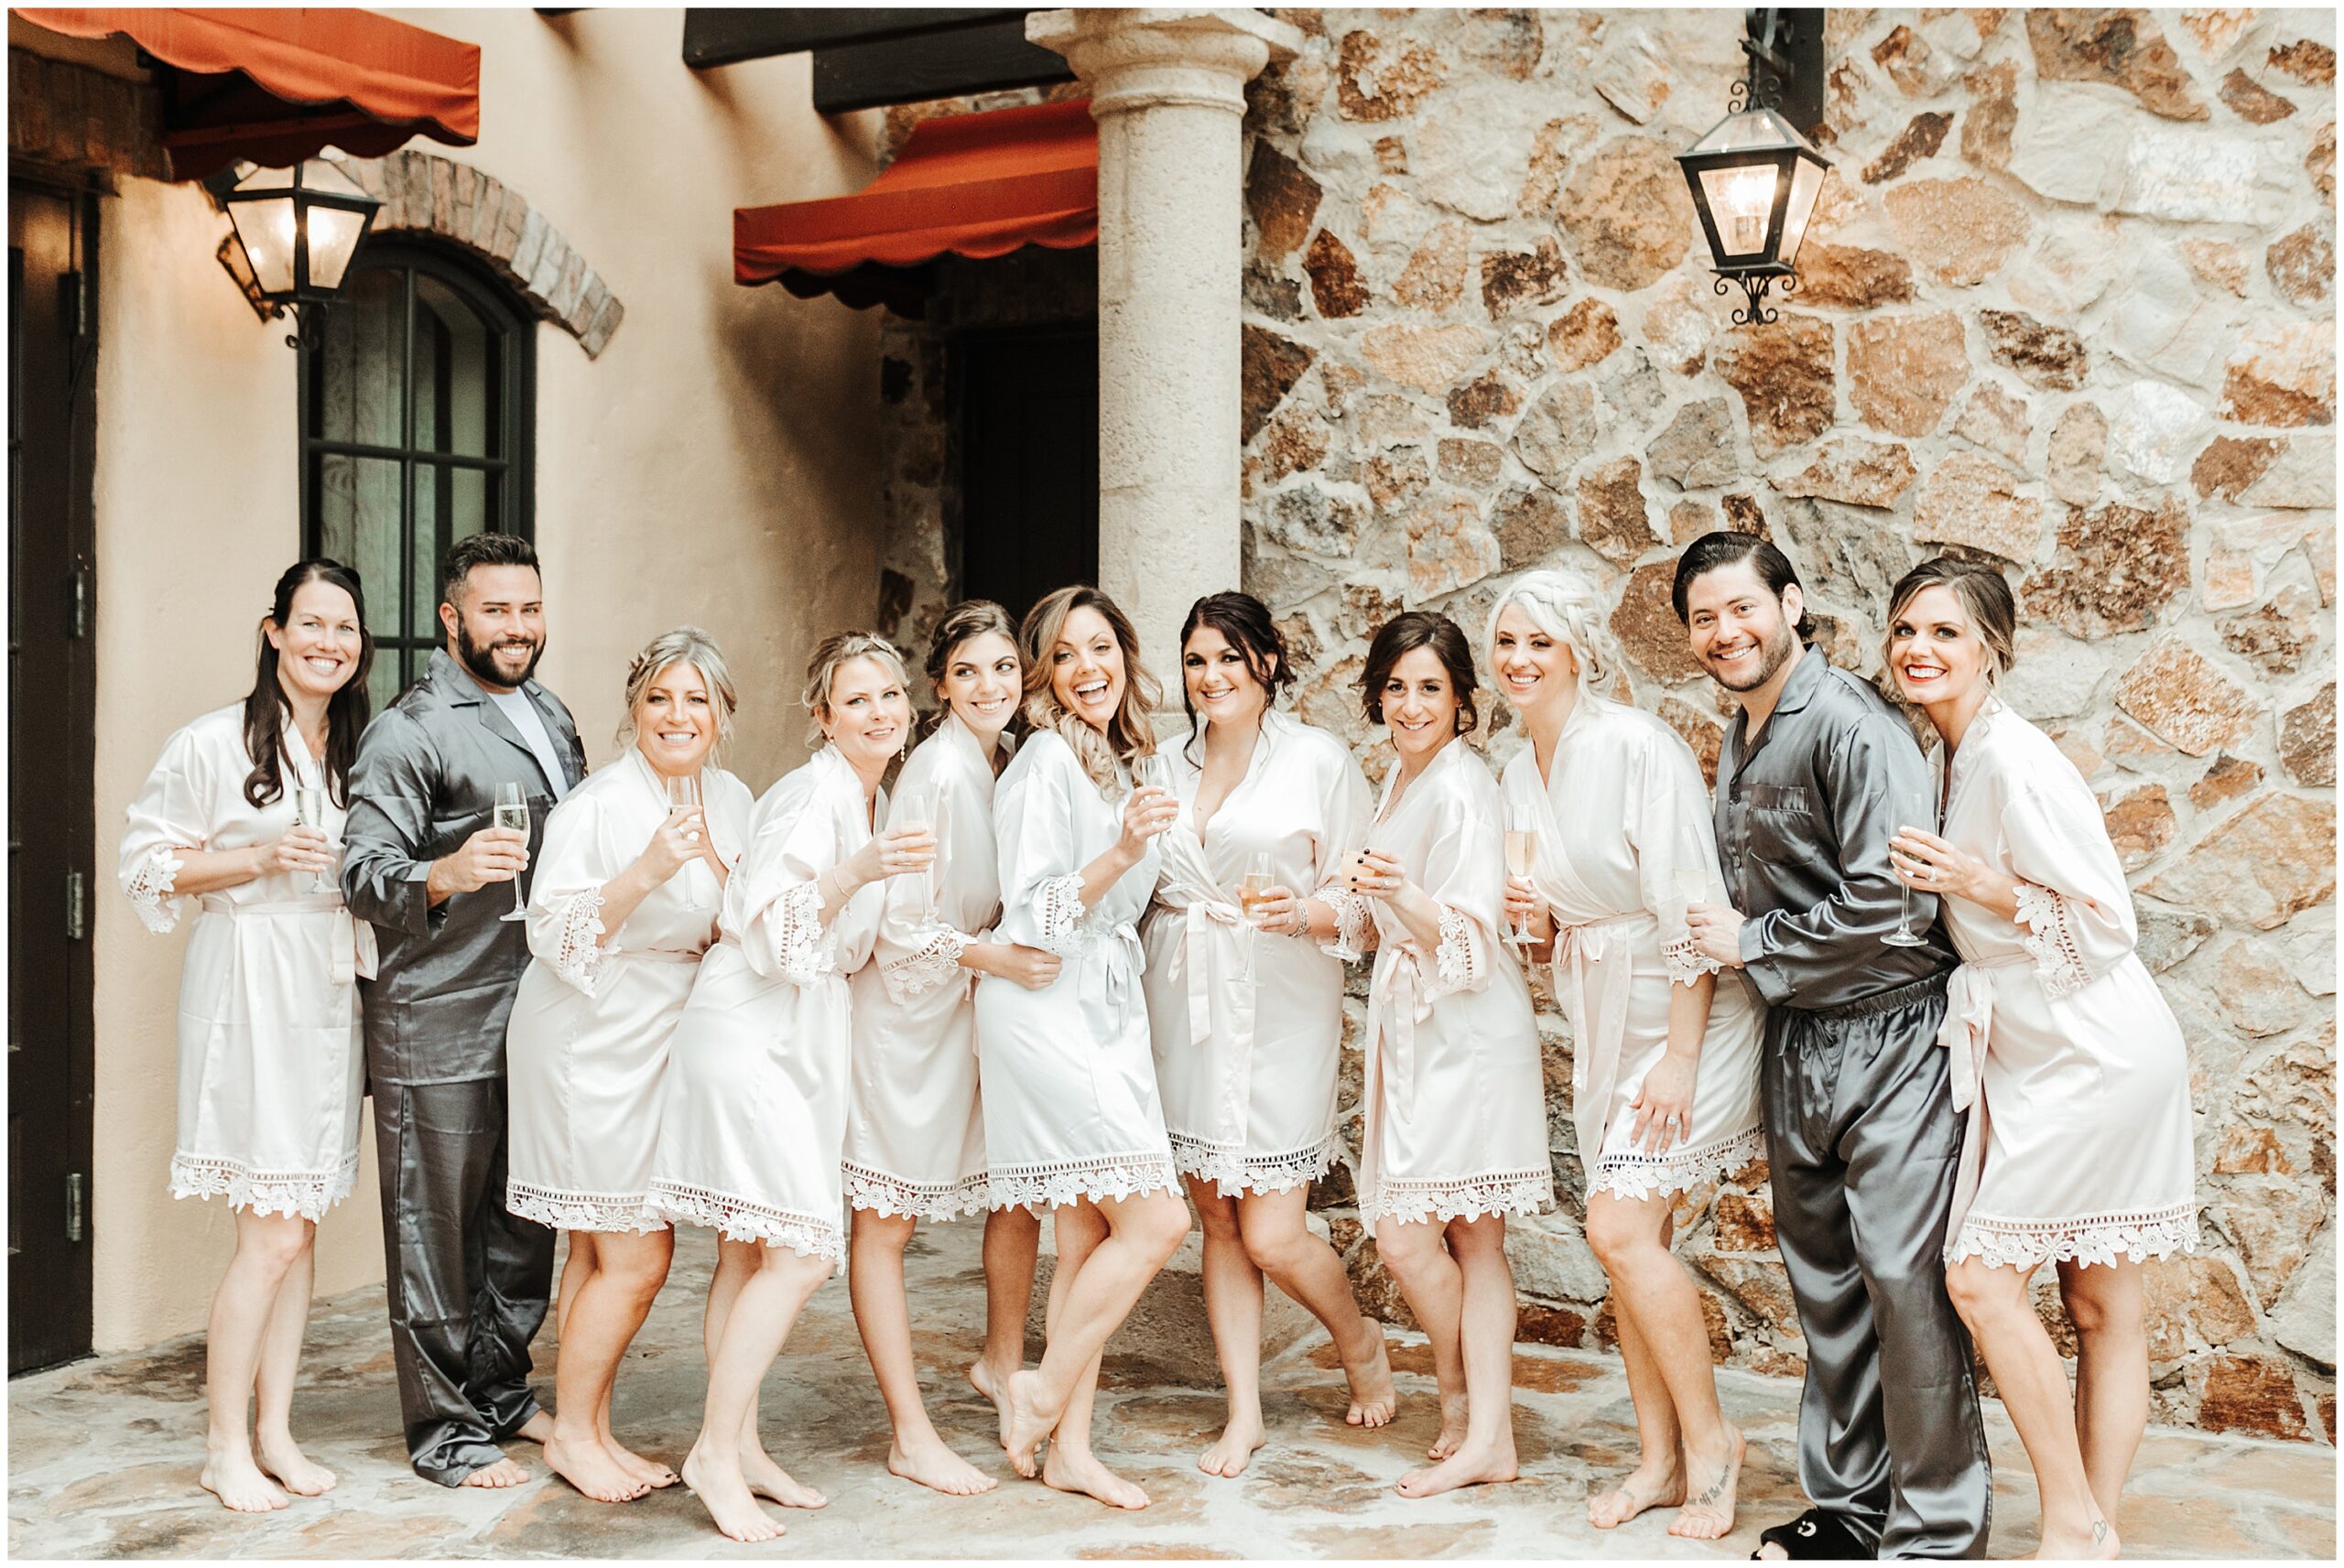 cute photo of bridal party getting ready for wedding ceremony at Bella Collina wedding venue